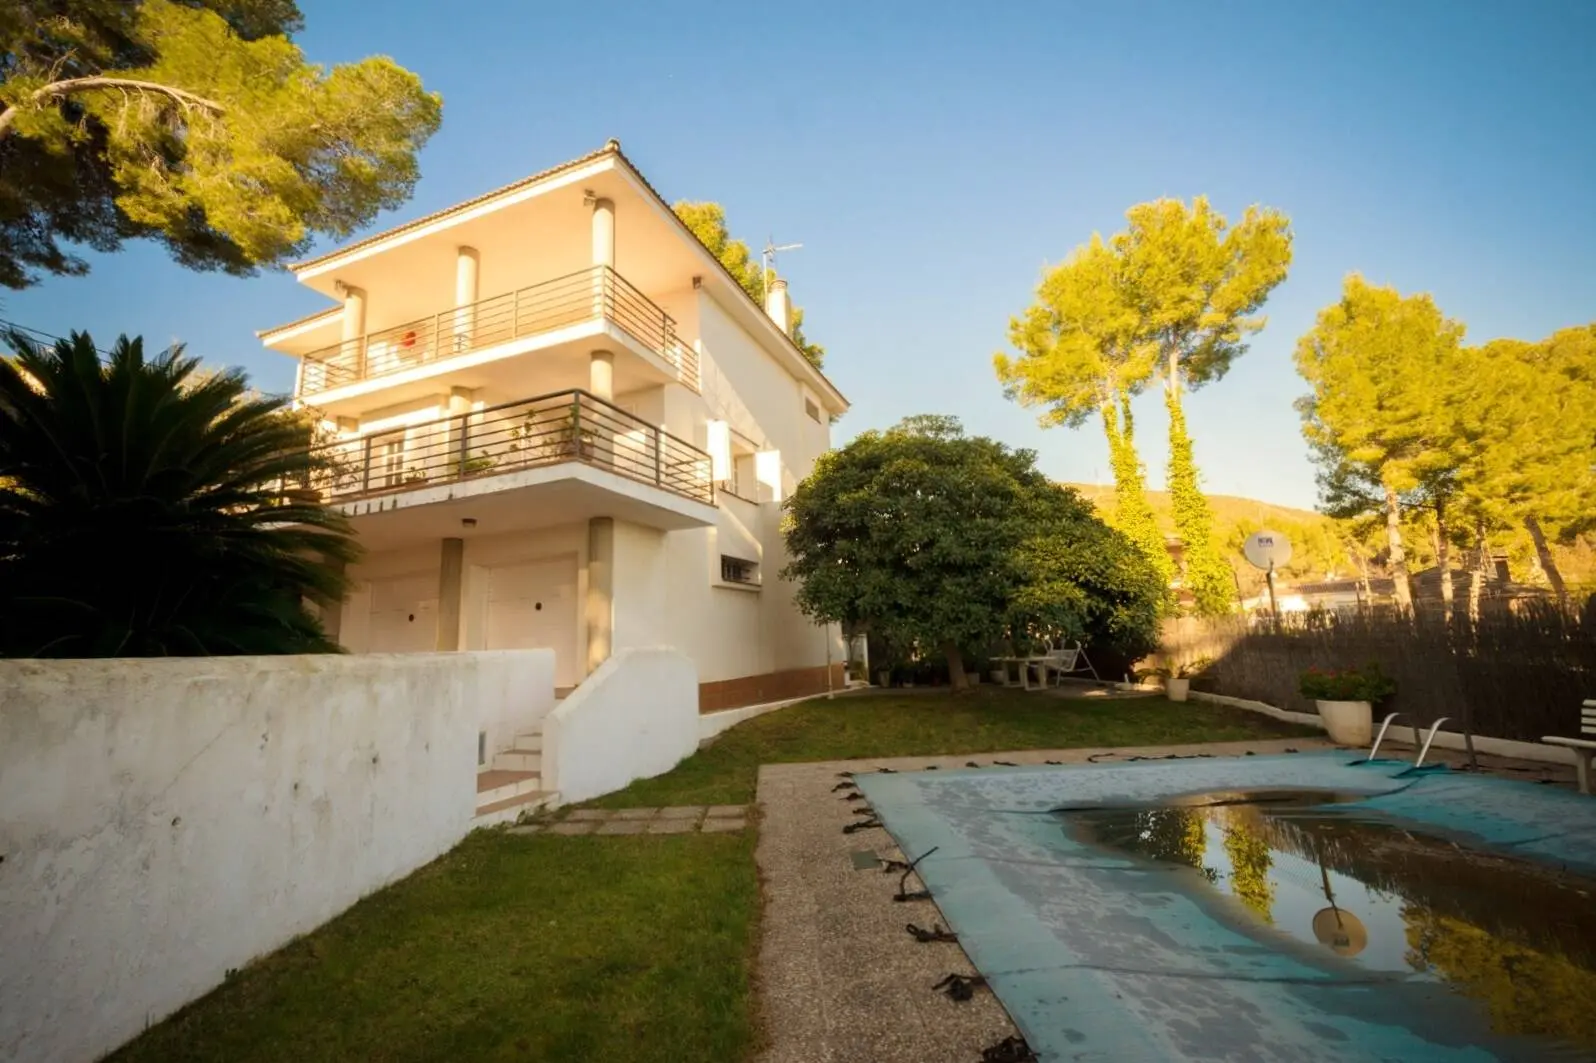 House for sale with a swimming pool in Castelldefels, Barcelona. 28